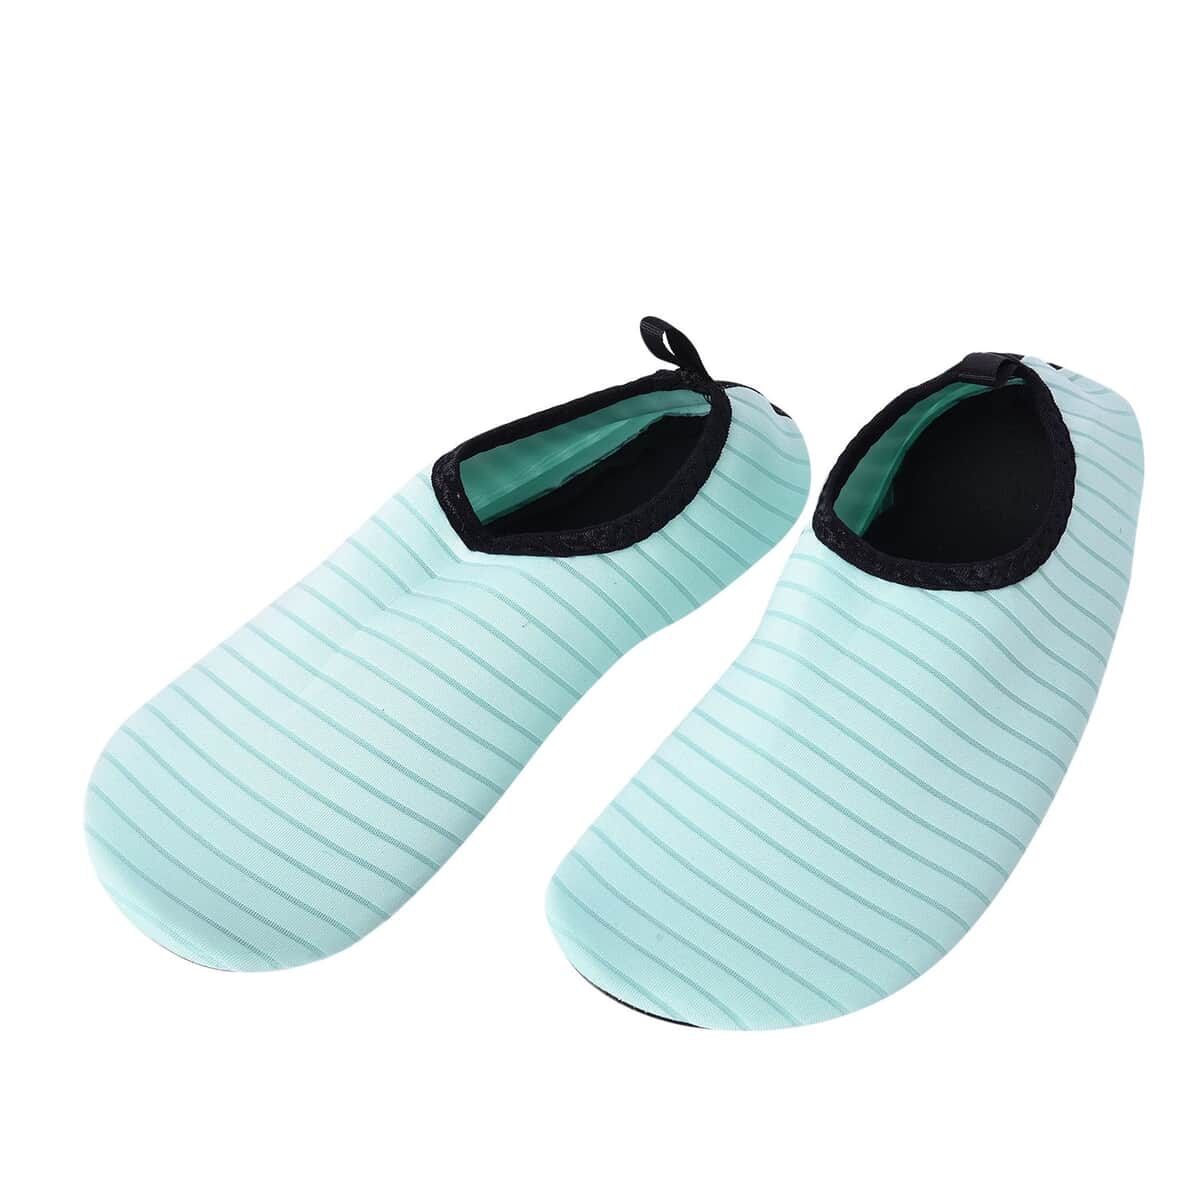 Green Mint Women's and Men's Water Shoes Barefoot Quick-Dry Aqua Socks (Size 7.5-8.5) image number 1